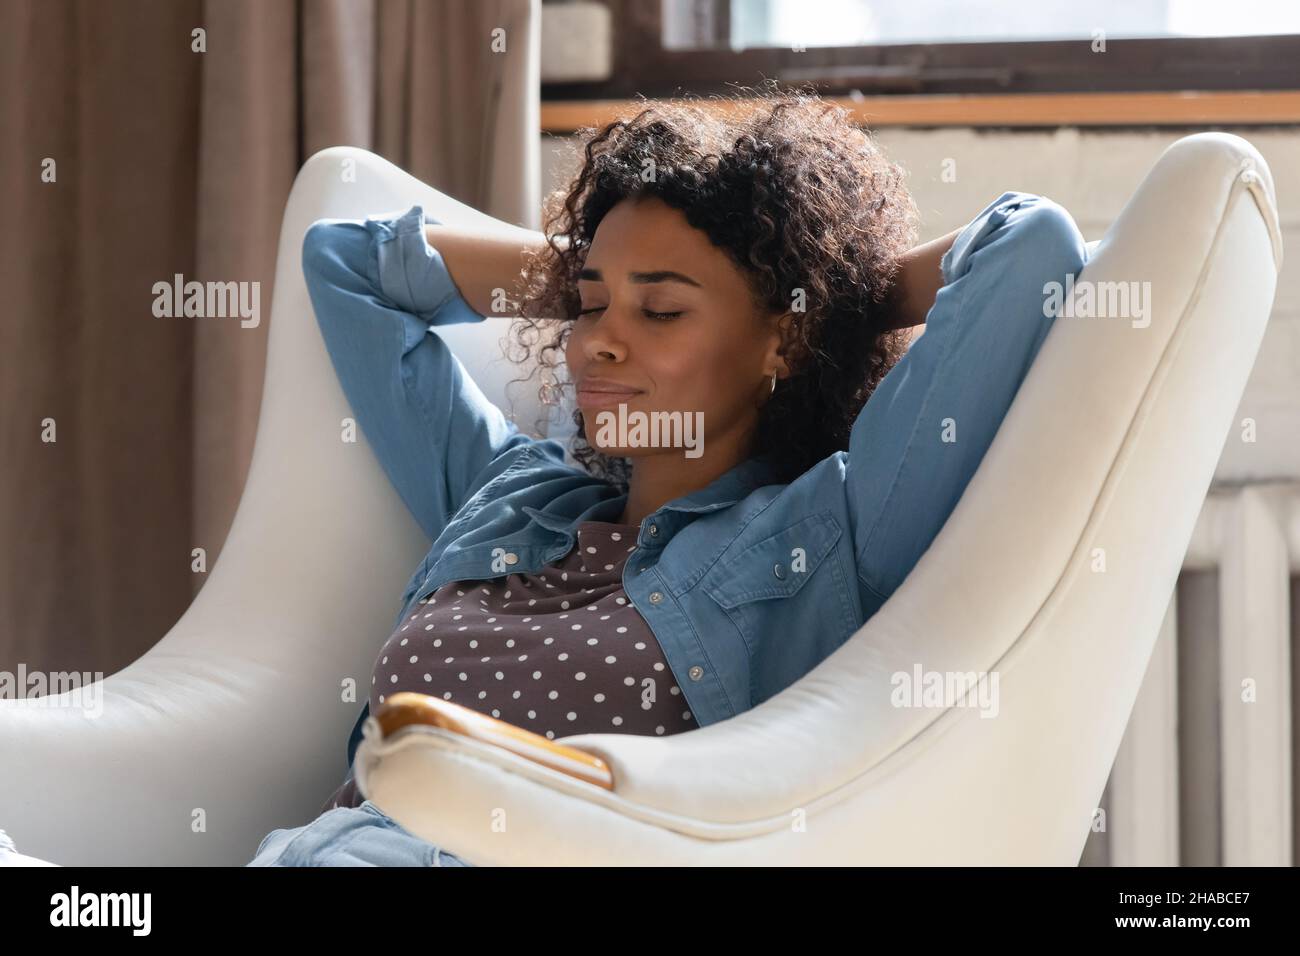 Serene African woman put hands behind head relaxing on armchair Stock Photo